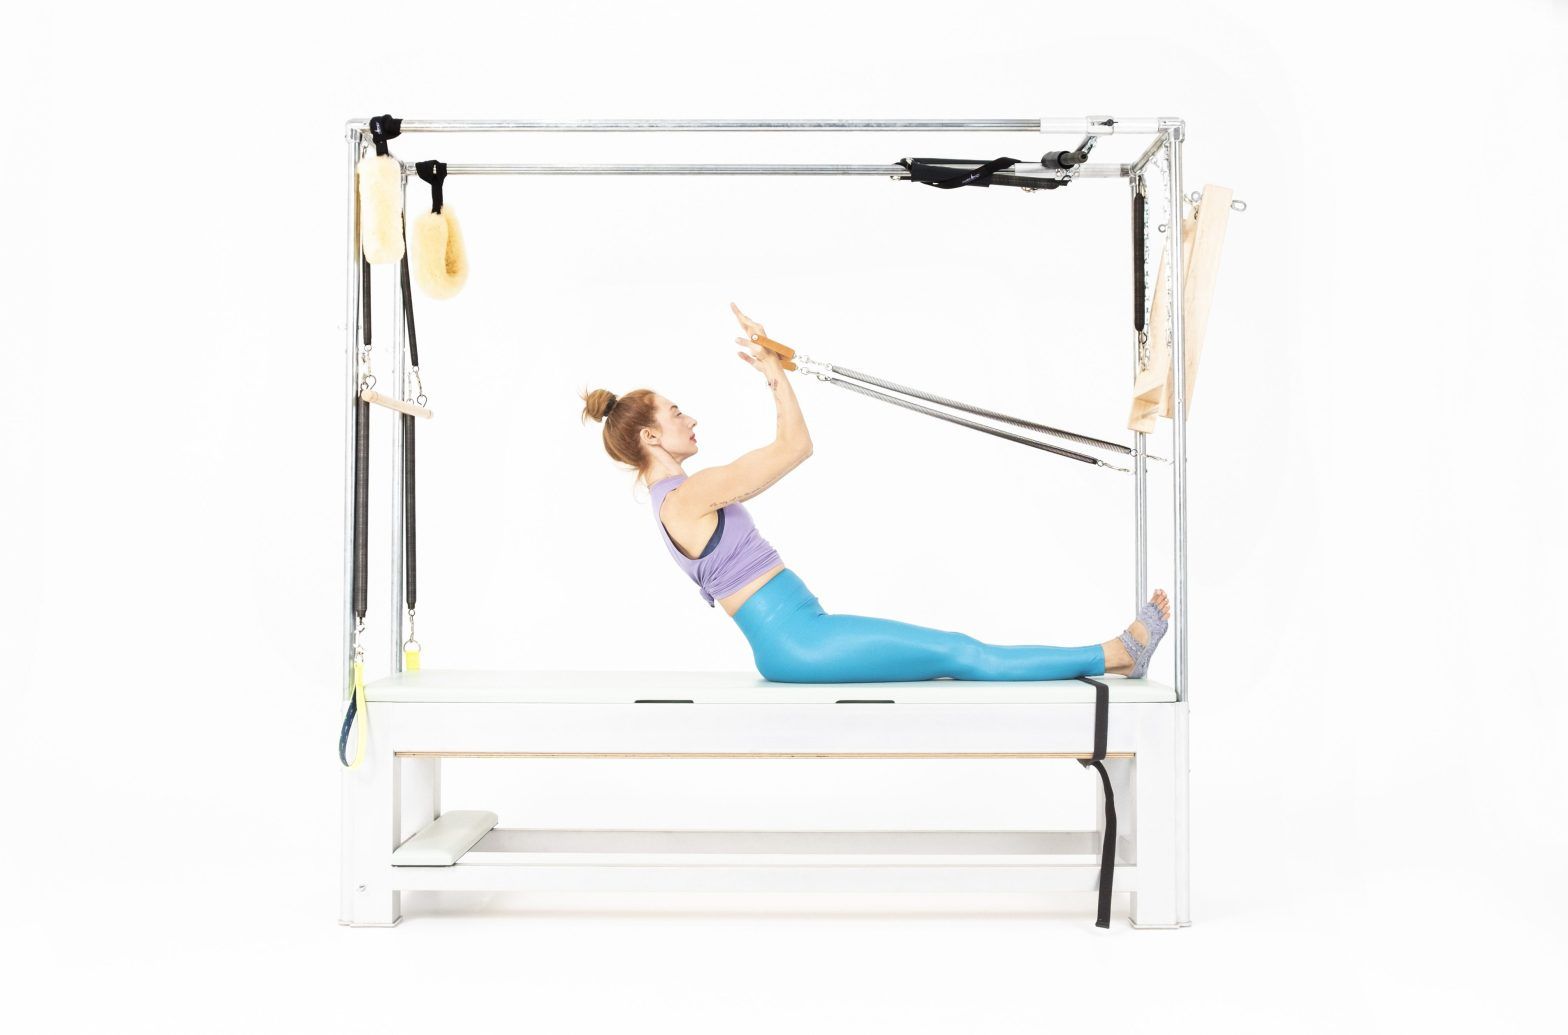 Rowing 2 90 Degrees with Arm Springs on the Cadillac or Tower Online Pilates Classes